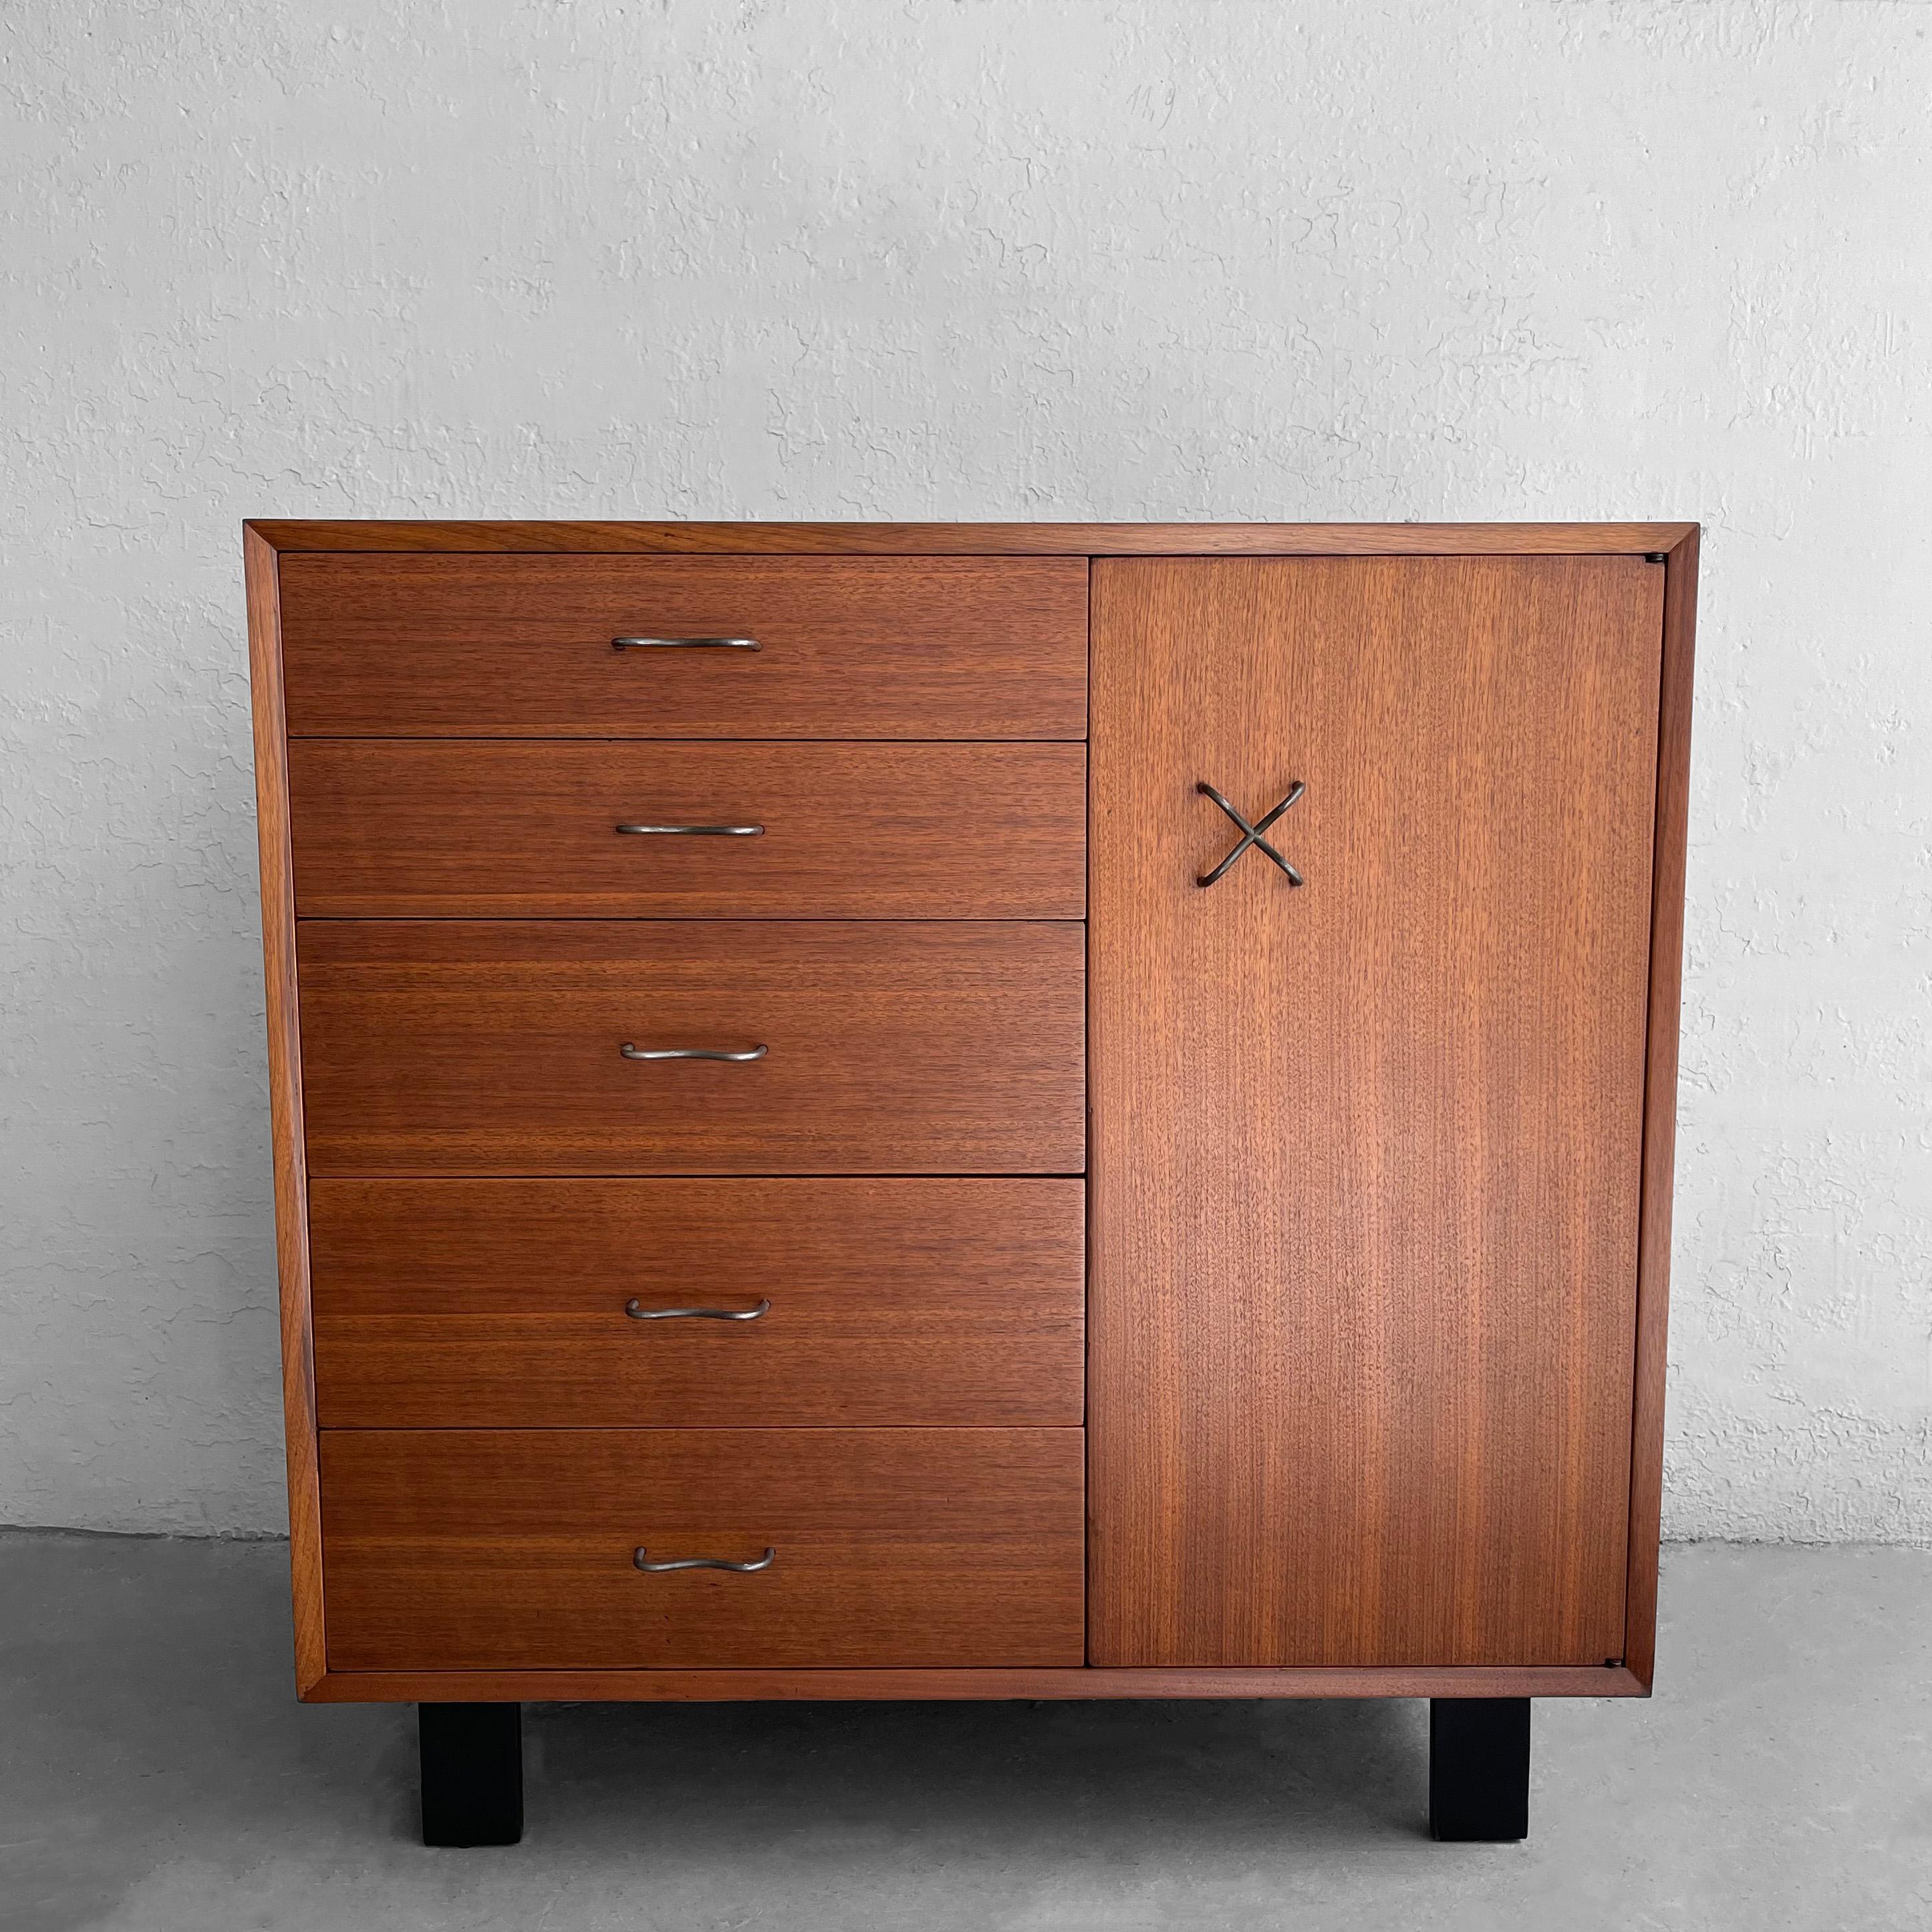 Classic, Mid-Century Modern, walnut, highboy dresser by George Nelson for Herman Miller features 5 drawers with original steel 